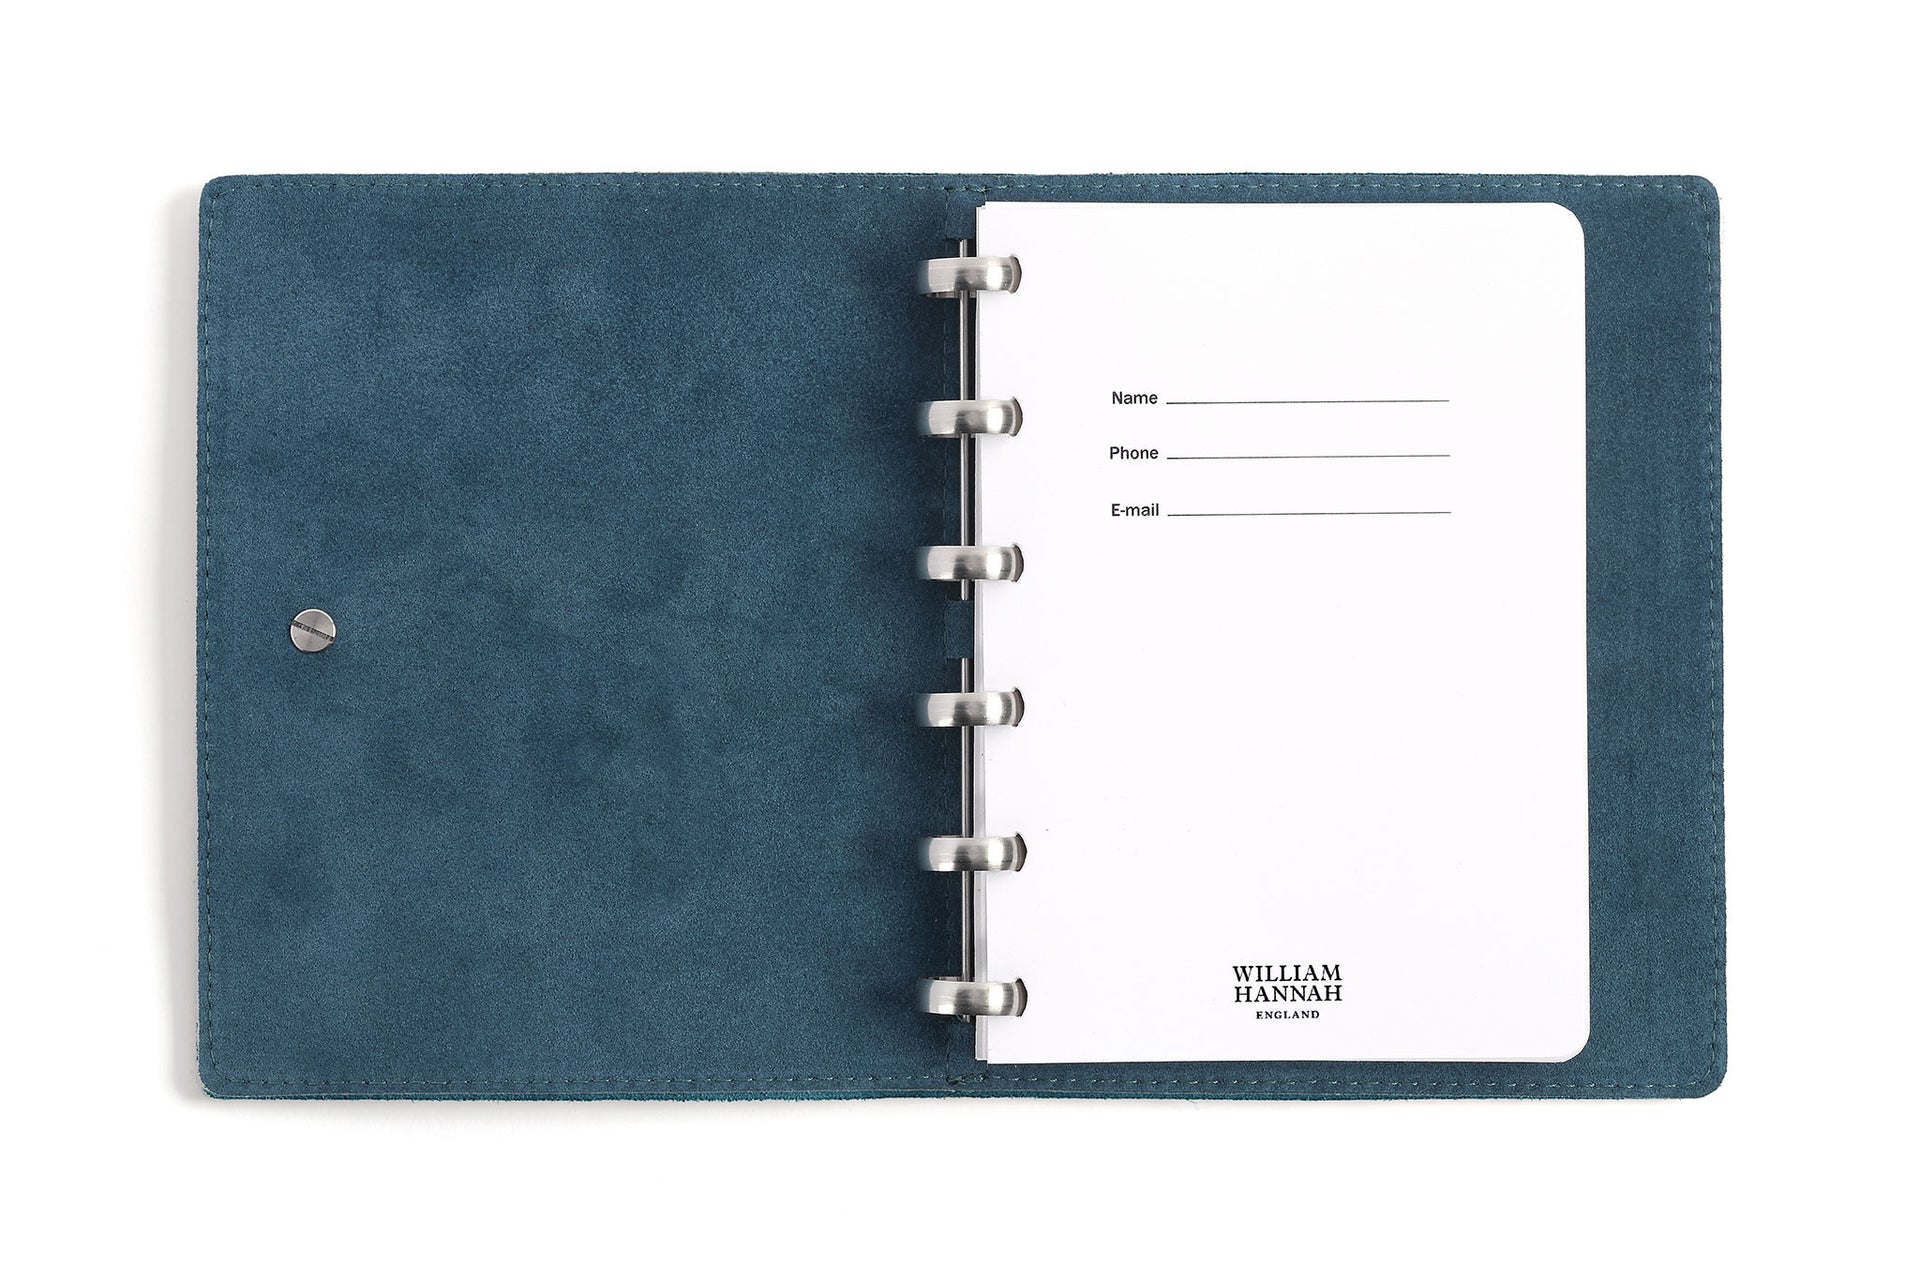 William Hannah dark green leather and blue suede A6 notebook: inside